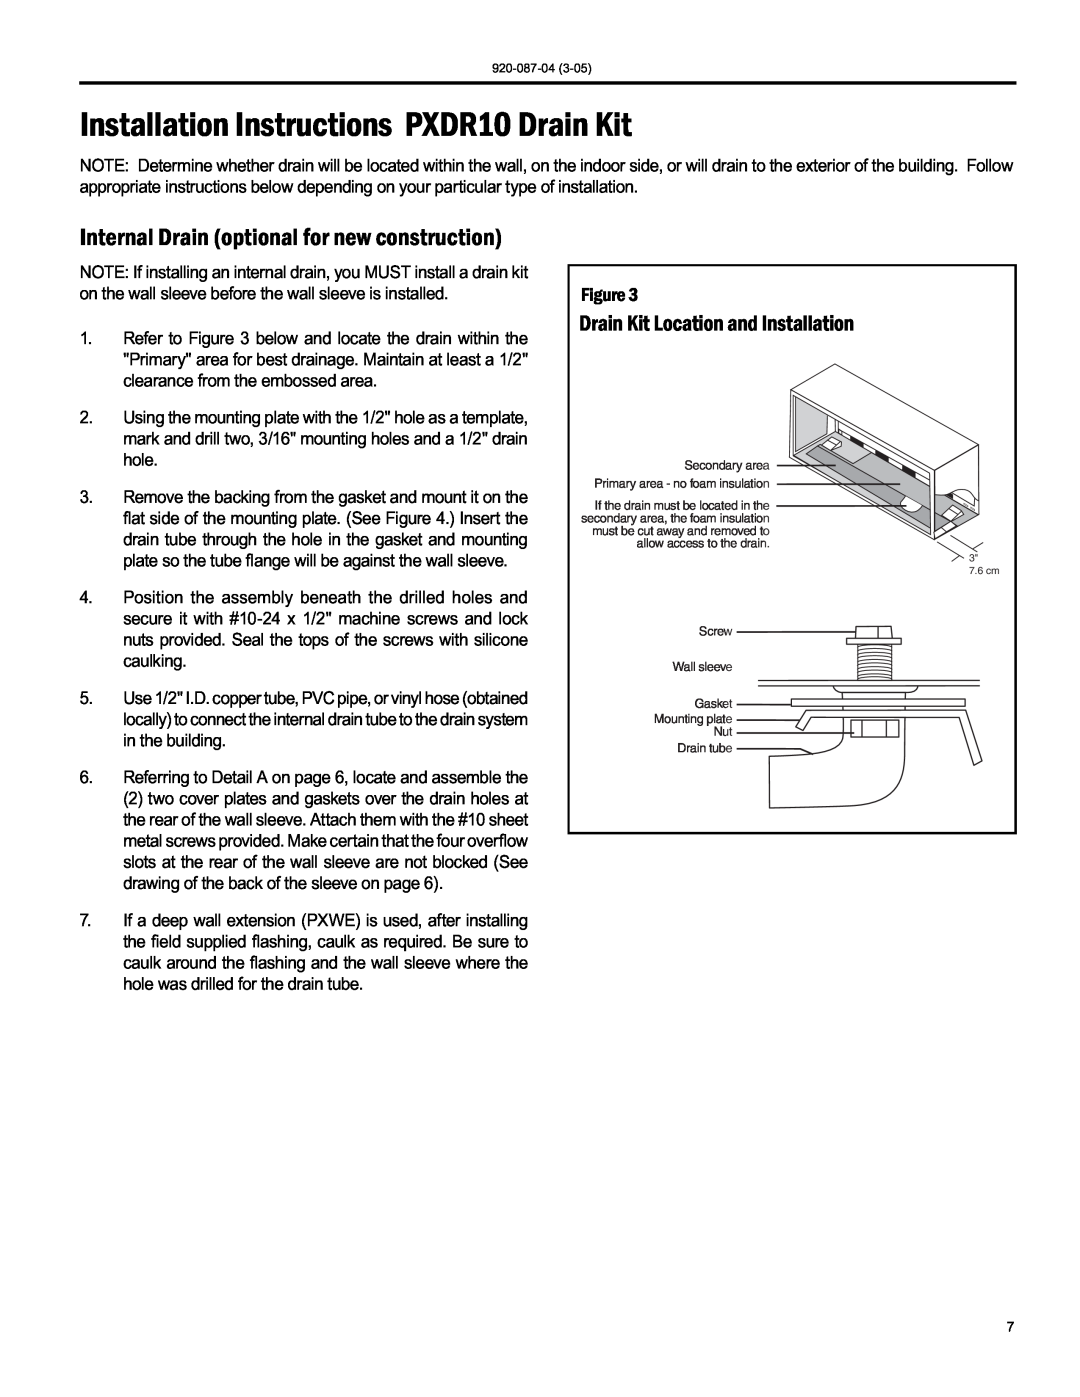 Friedrich 920-087-04 (3-05) manual Installation Instructions PXDR10 Drain Kit, Internal Drain optional for new construction 